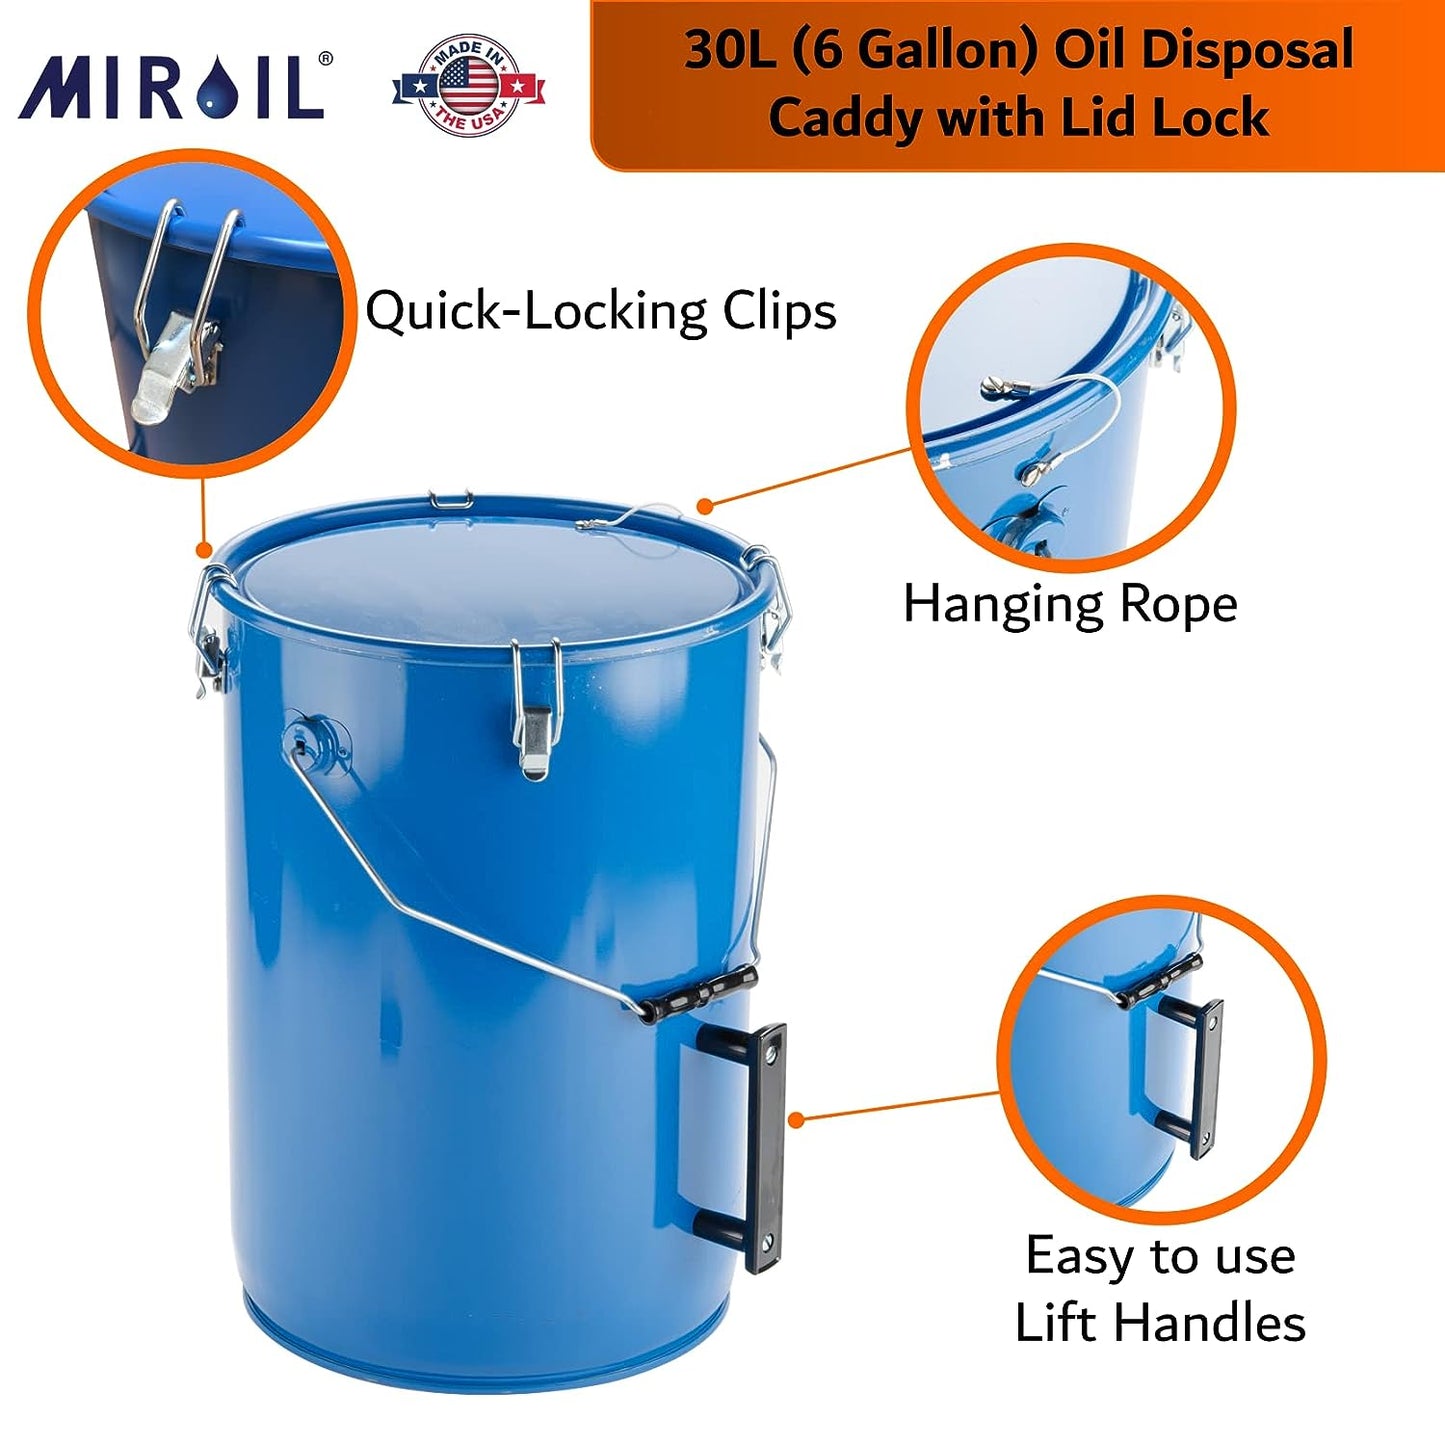 MirOil Utility Pail for Hot Oil, Model 02030 / 30L – Hold 6 Gallons